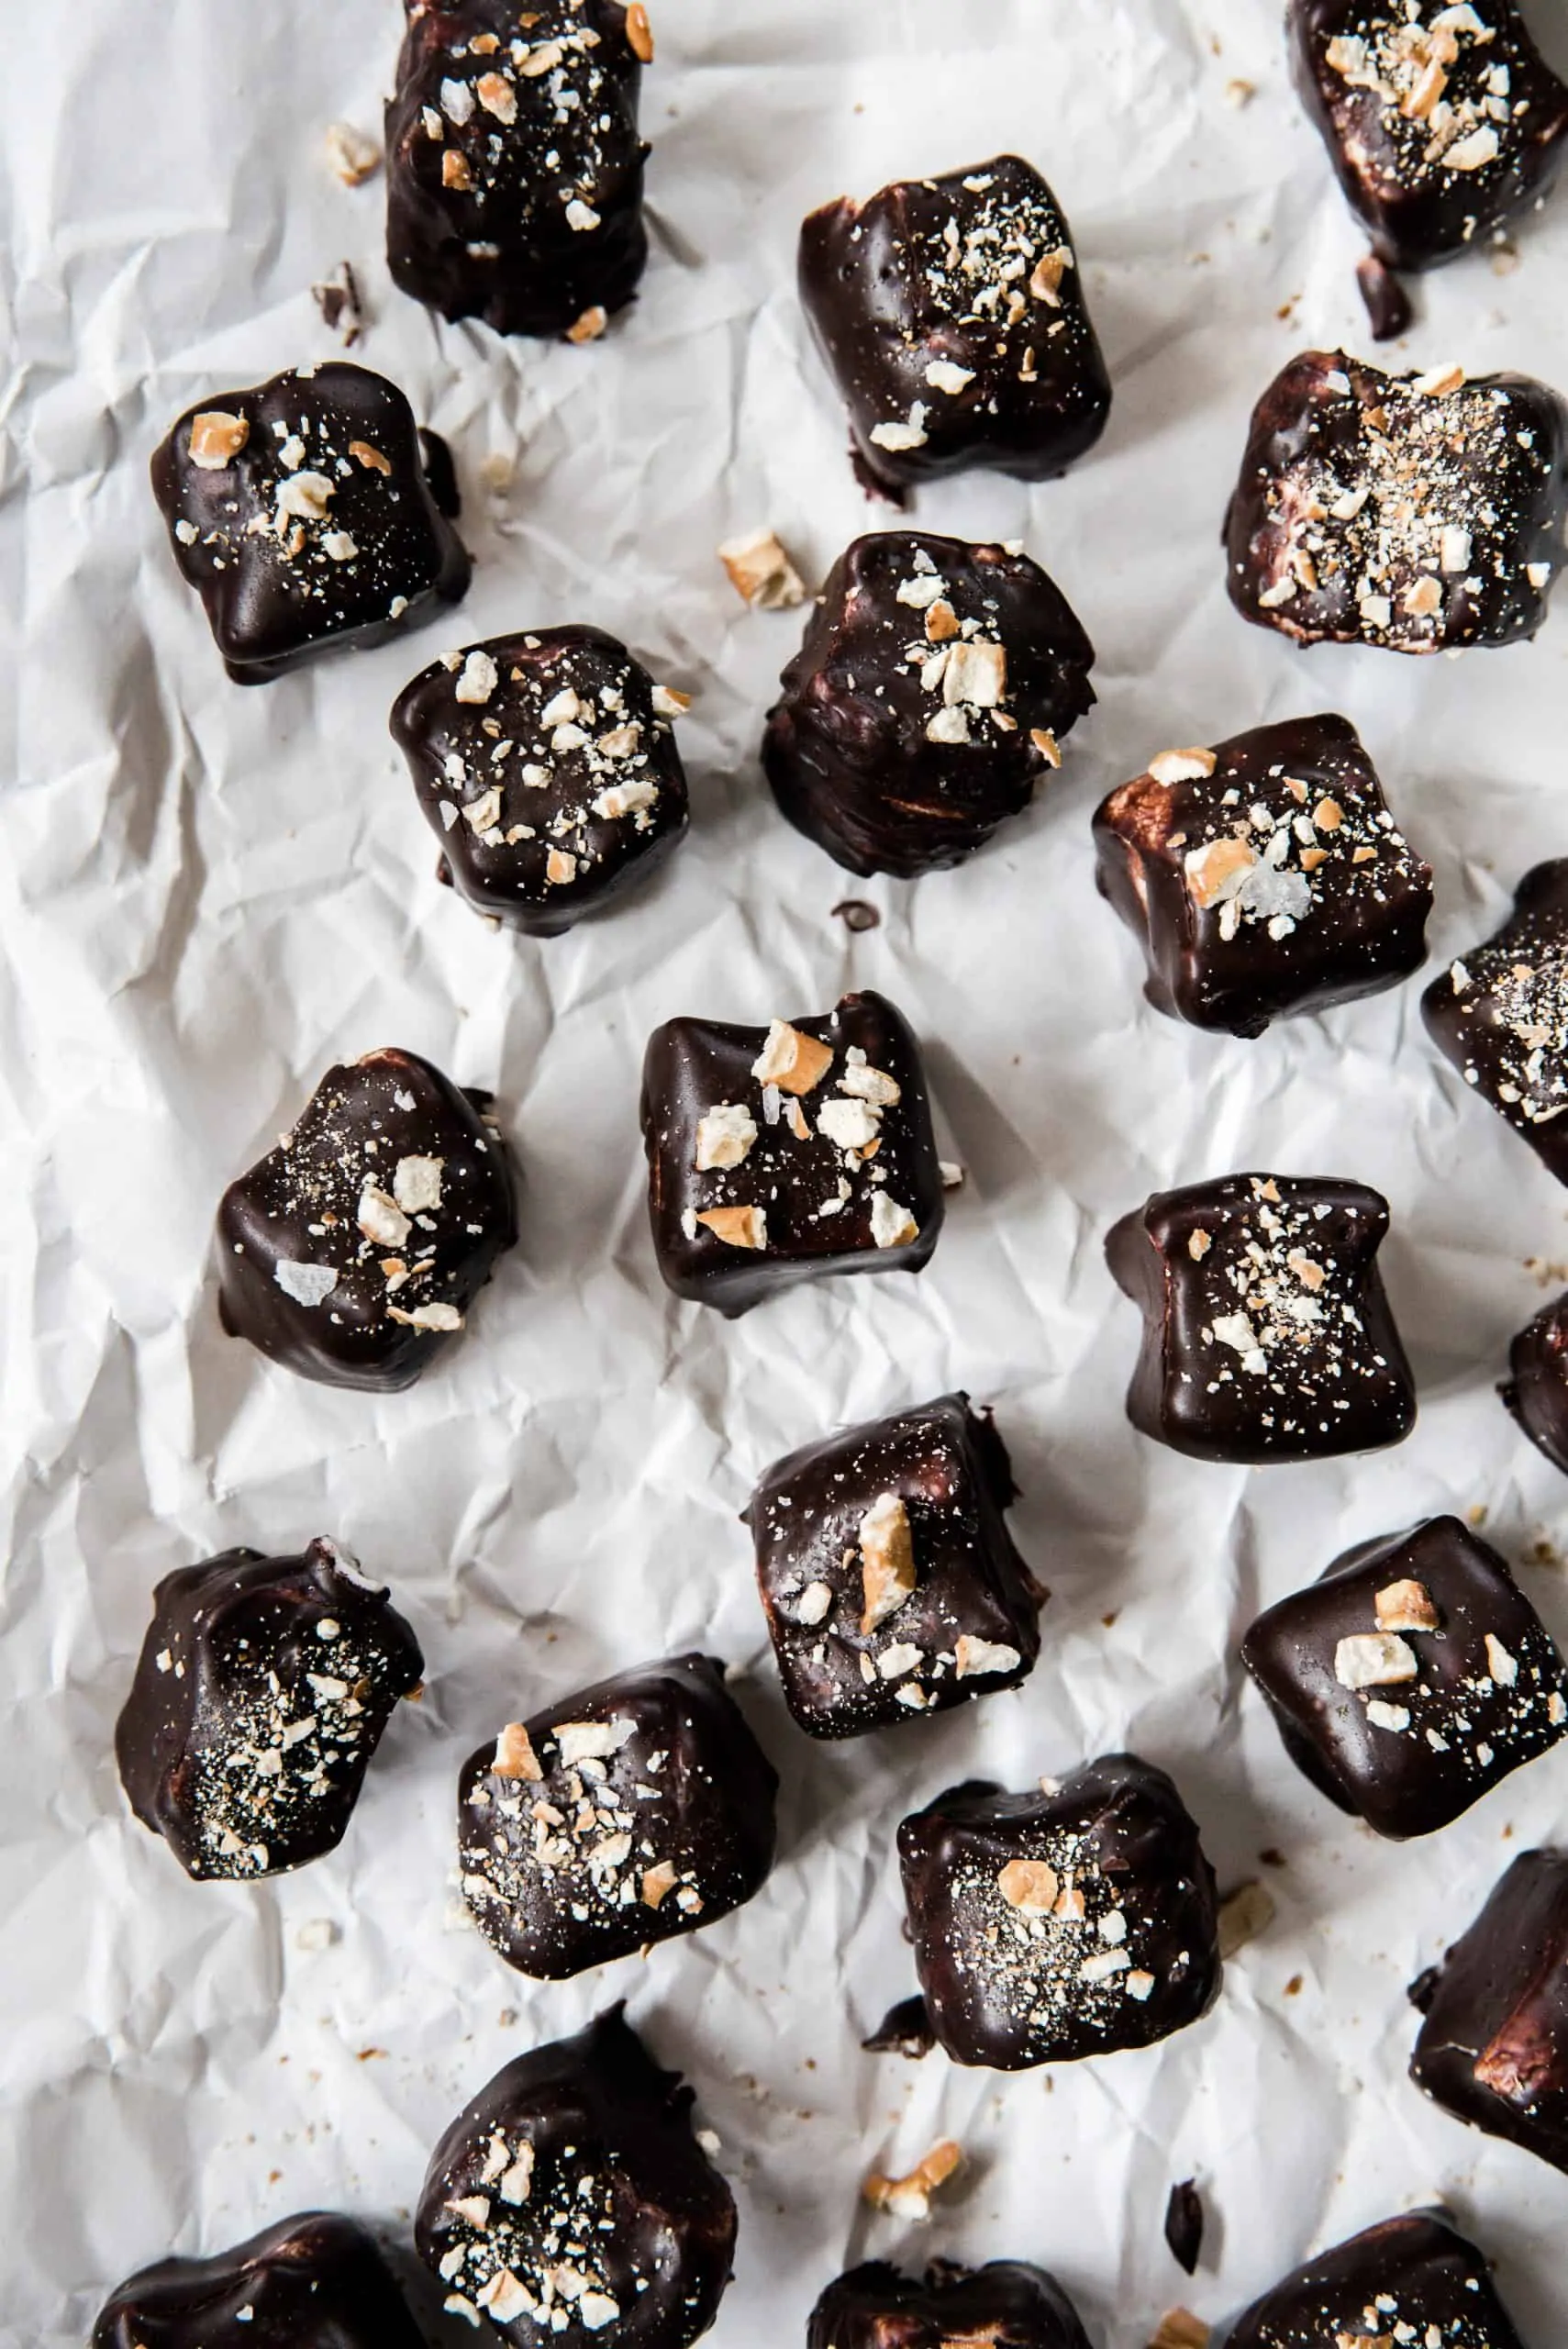 Best Christmas Desserts: Chocolate Covered Marshmallows